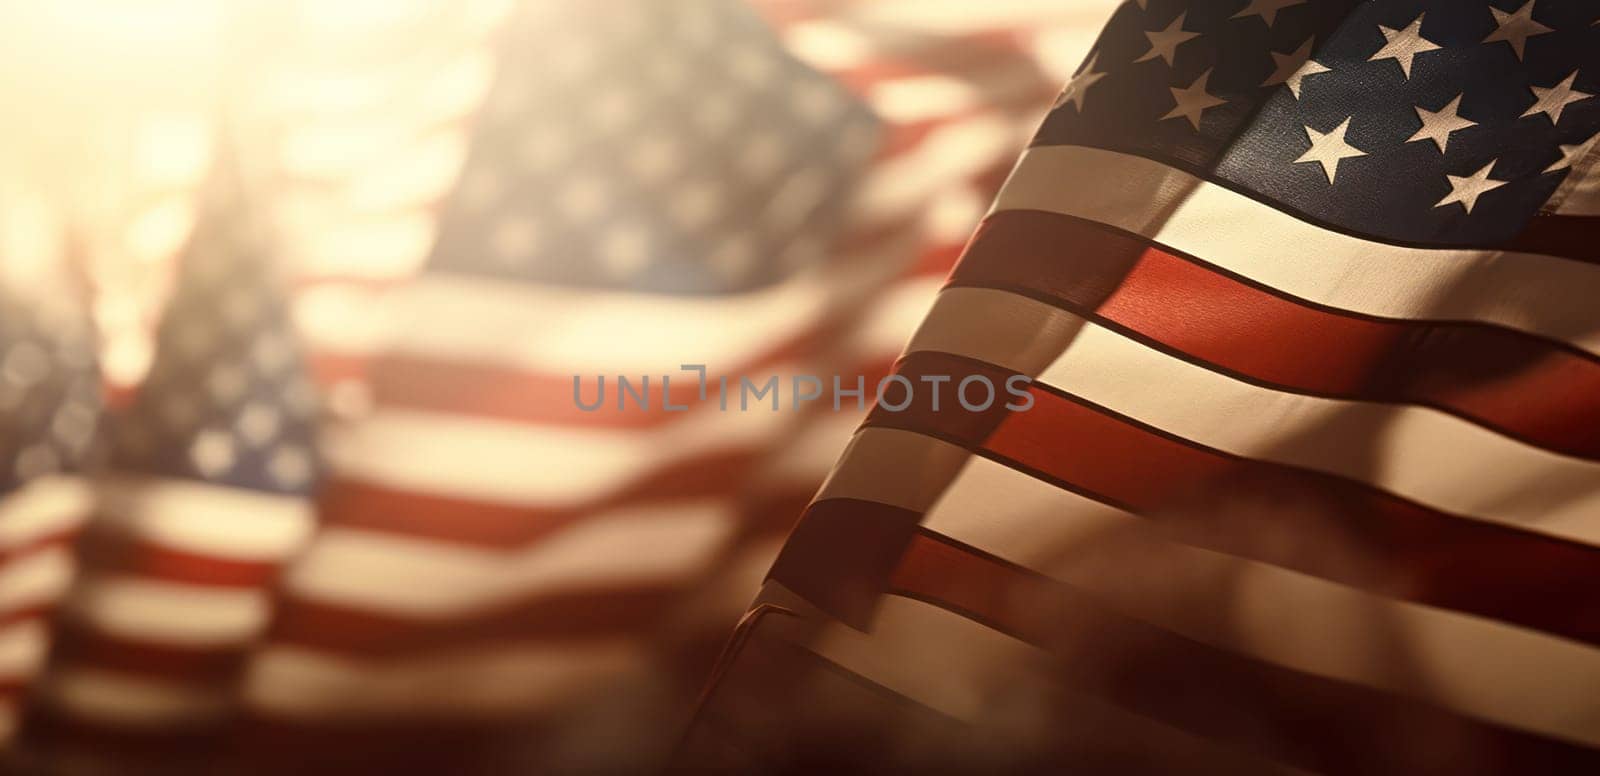 Symbolic Glory: Waving American Flag of Freedom and Patriotism against a Red, White, and Blue Background by Vichizh